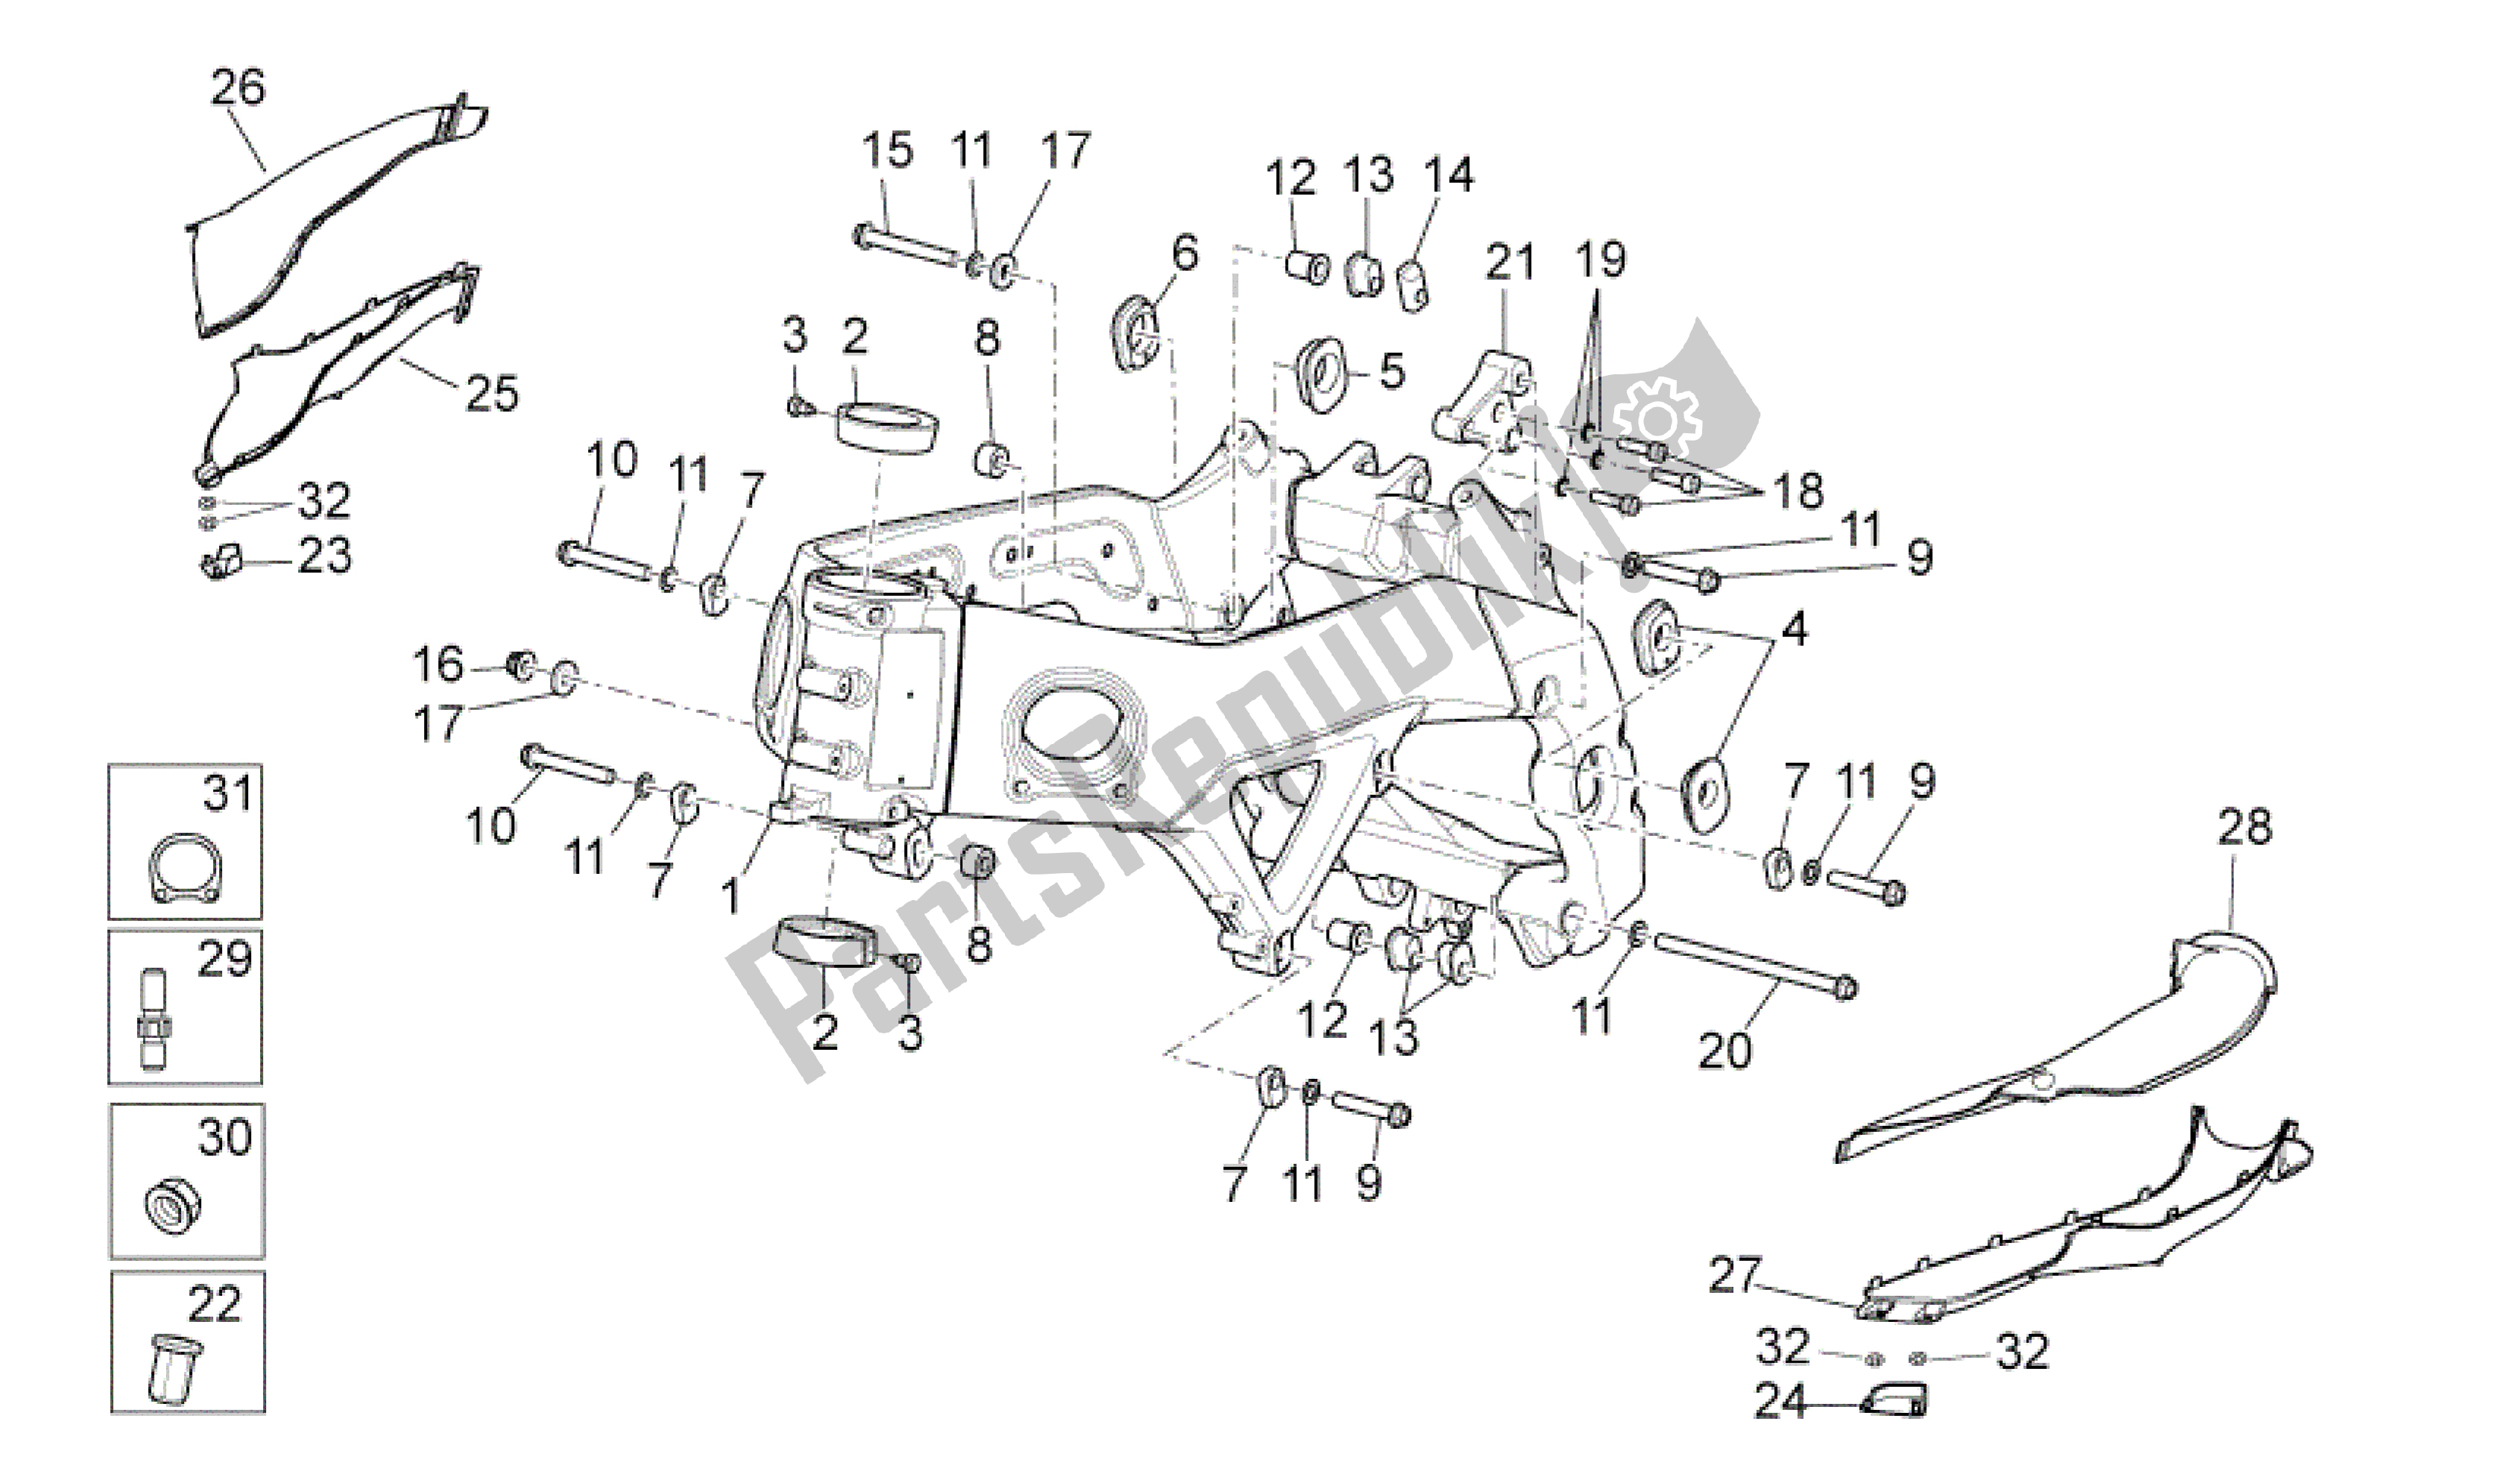 All parts for the Frame I of the Aprilia RSV4 Aprc Factory ABS 3986 1000 2013